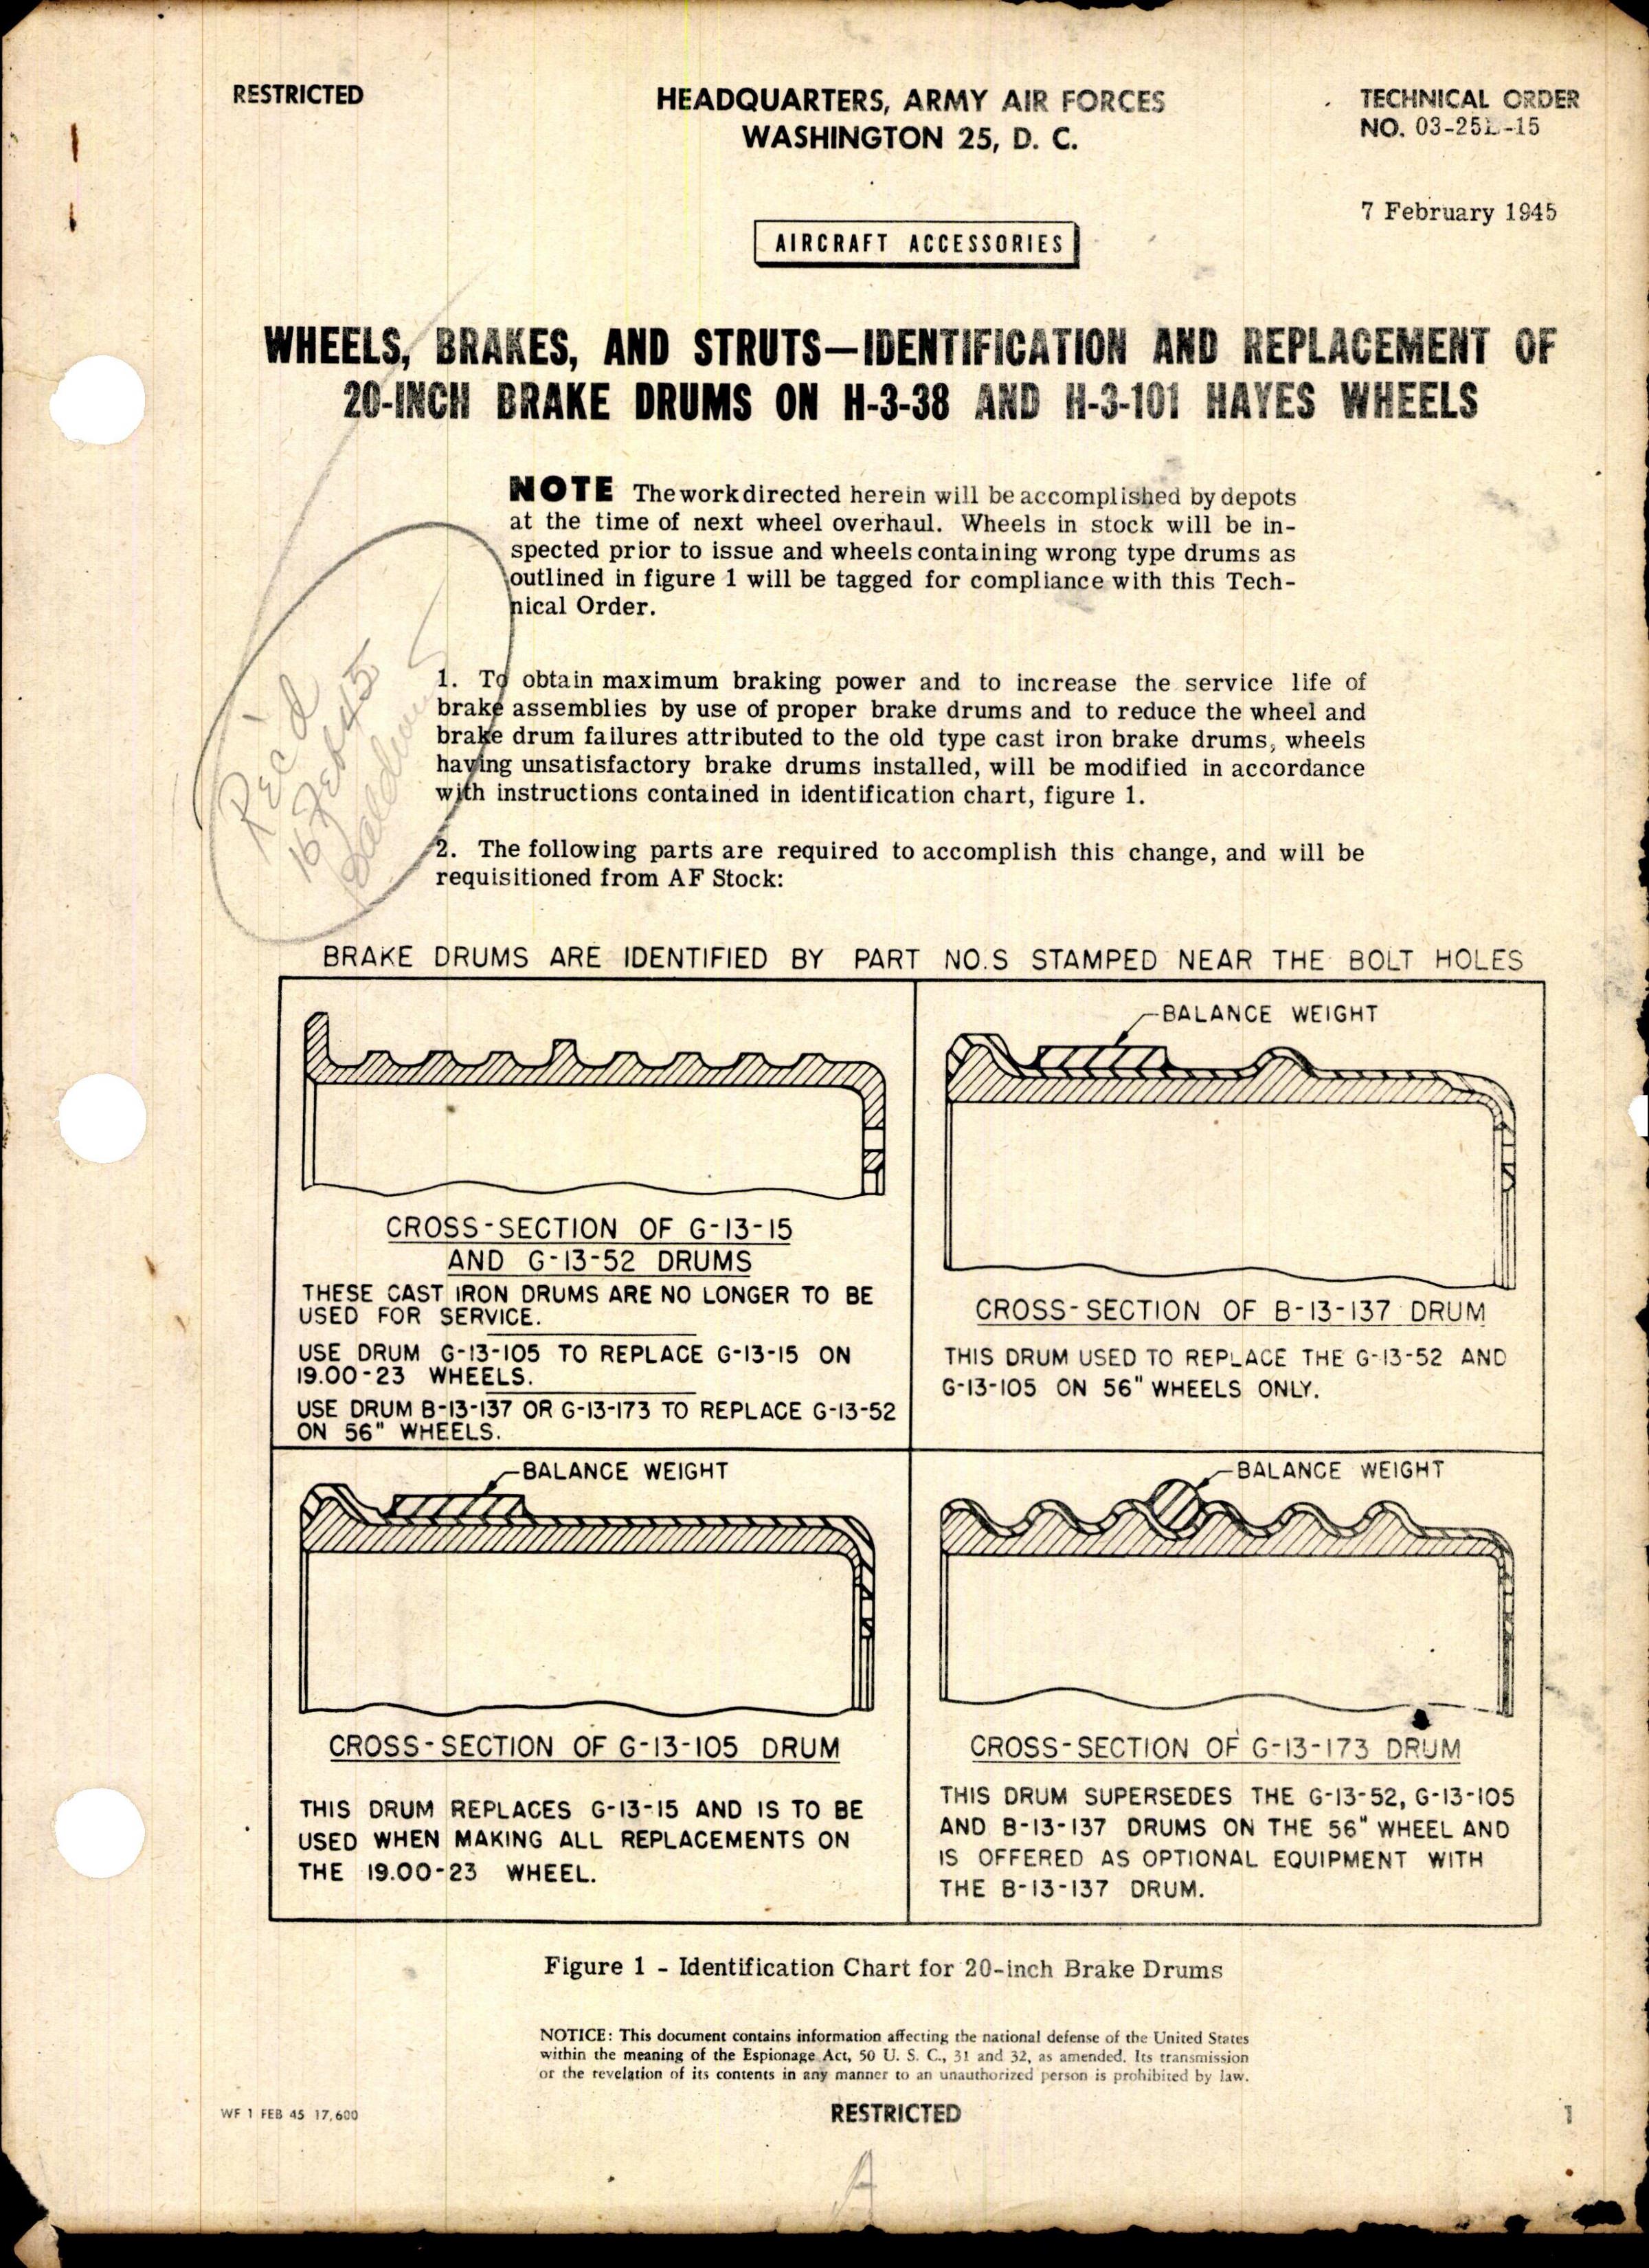 Sample page 1 from AirCorps Library document: Identification and Replacement of 20-Inch Brake Drums on H-3-38 and H-3-101 Hayes Wheels